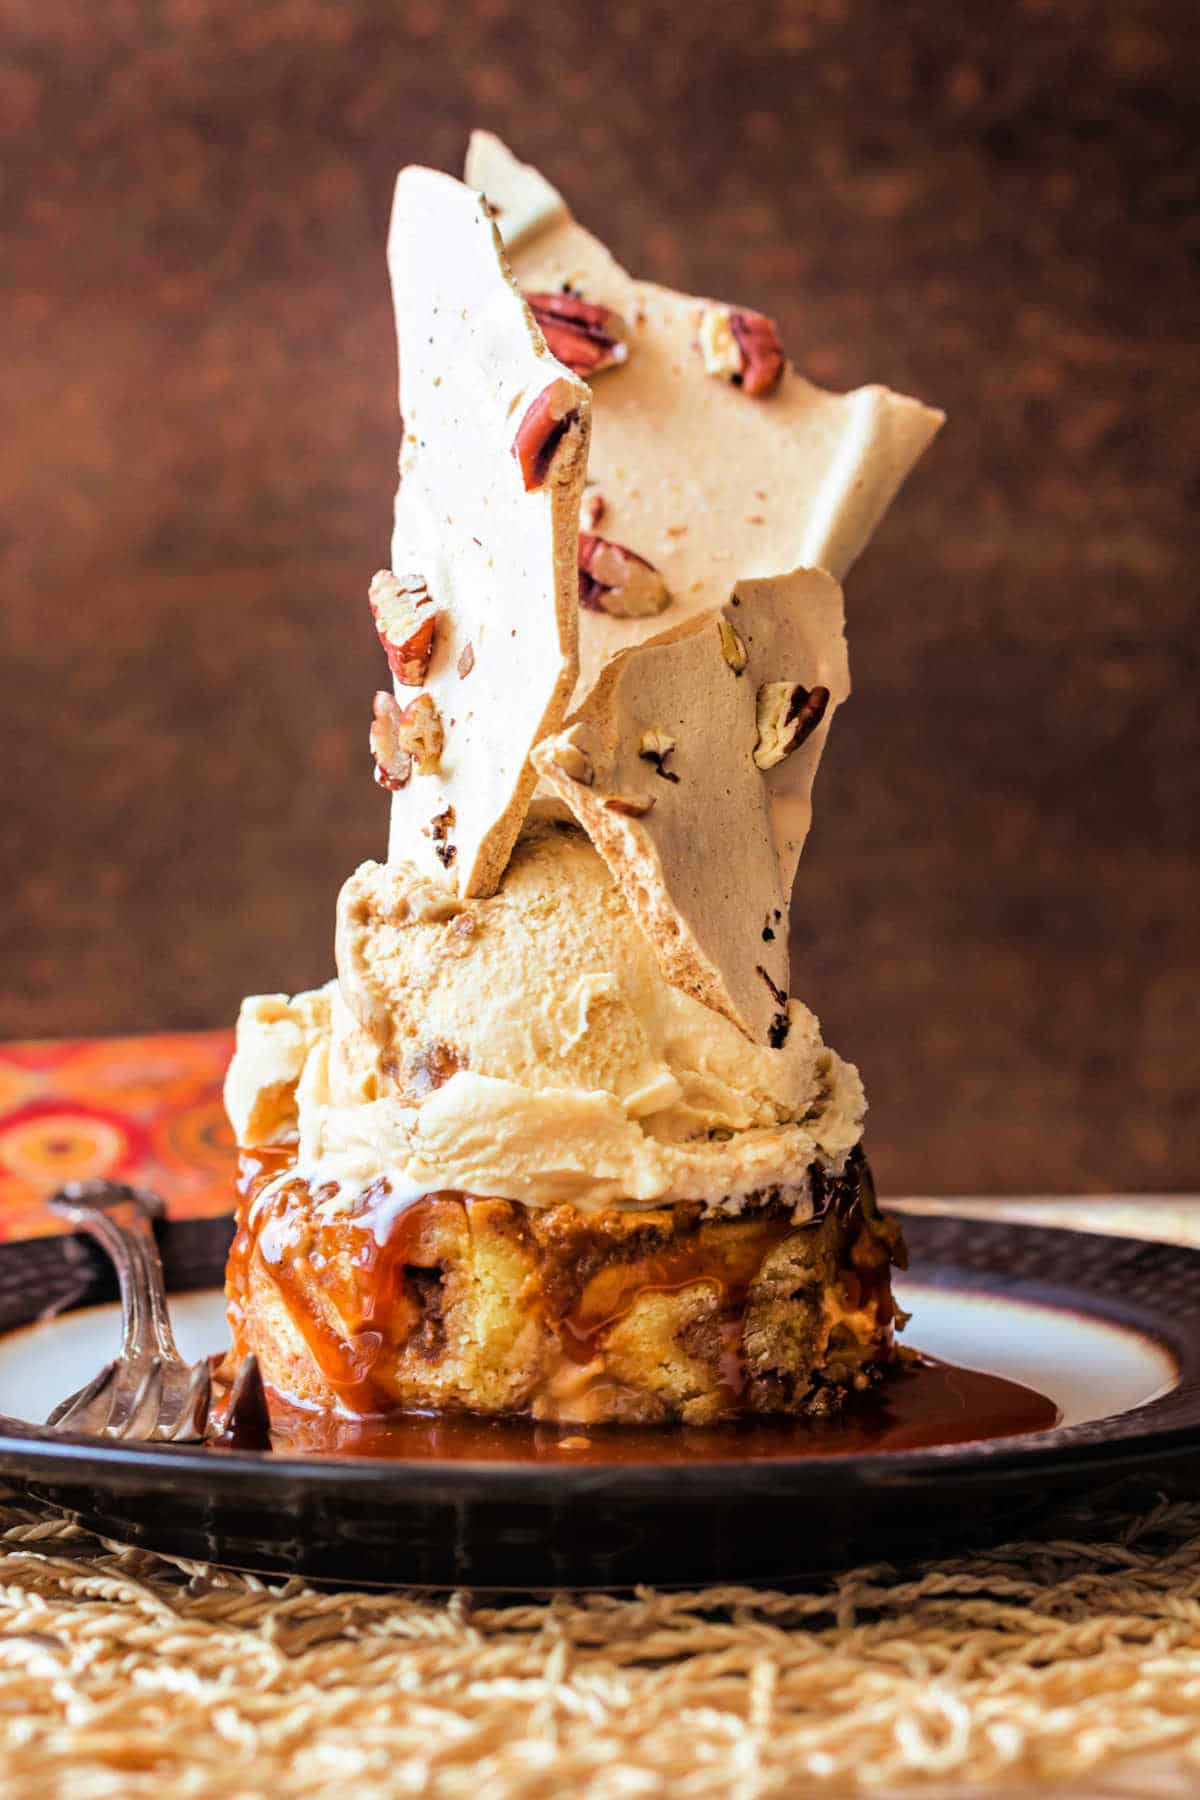 A dramatic shot of a piece of bread pudding in a pool of caramel topped with caramel ice cream with tall pieces of crispy meringue stuck in the ice cream.